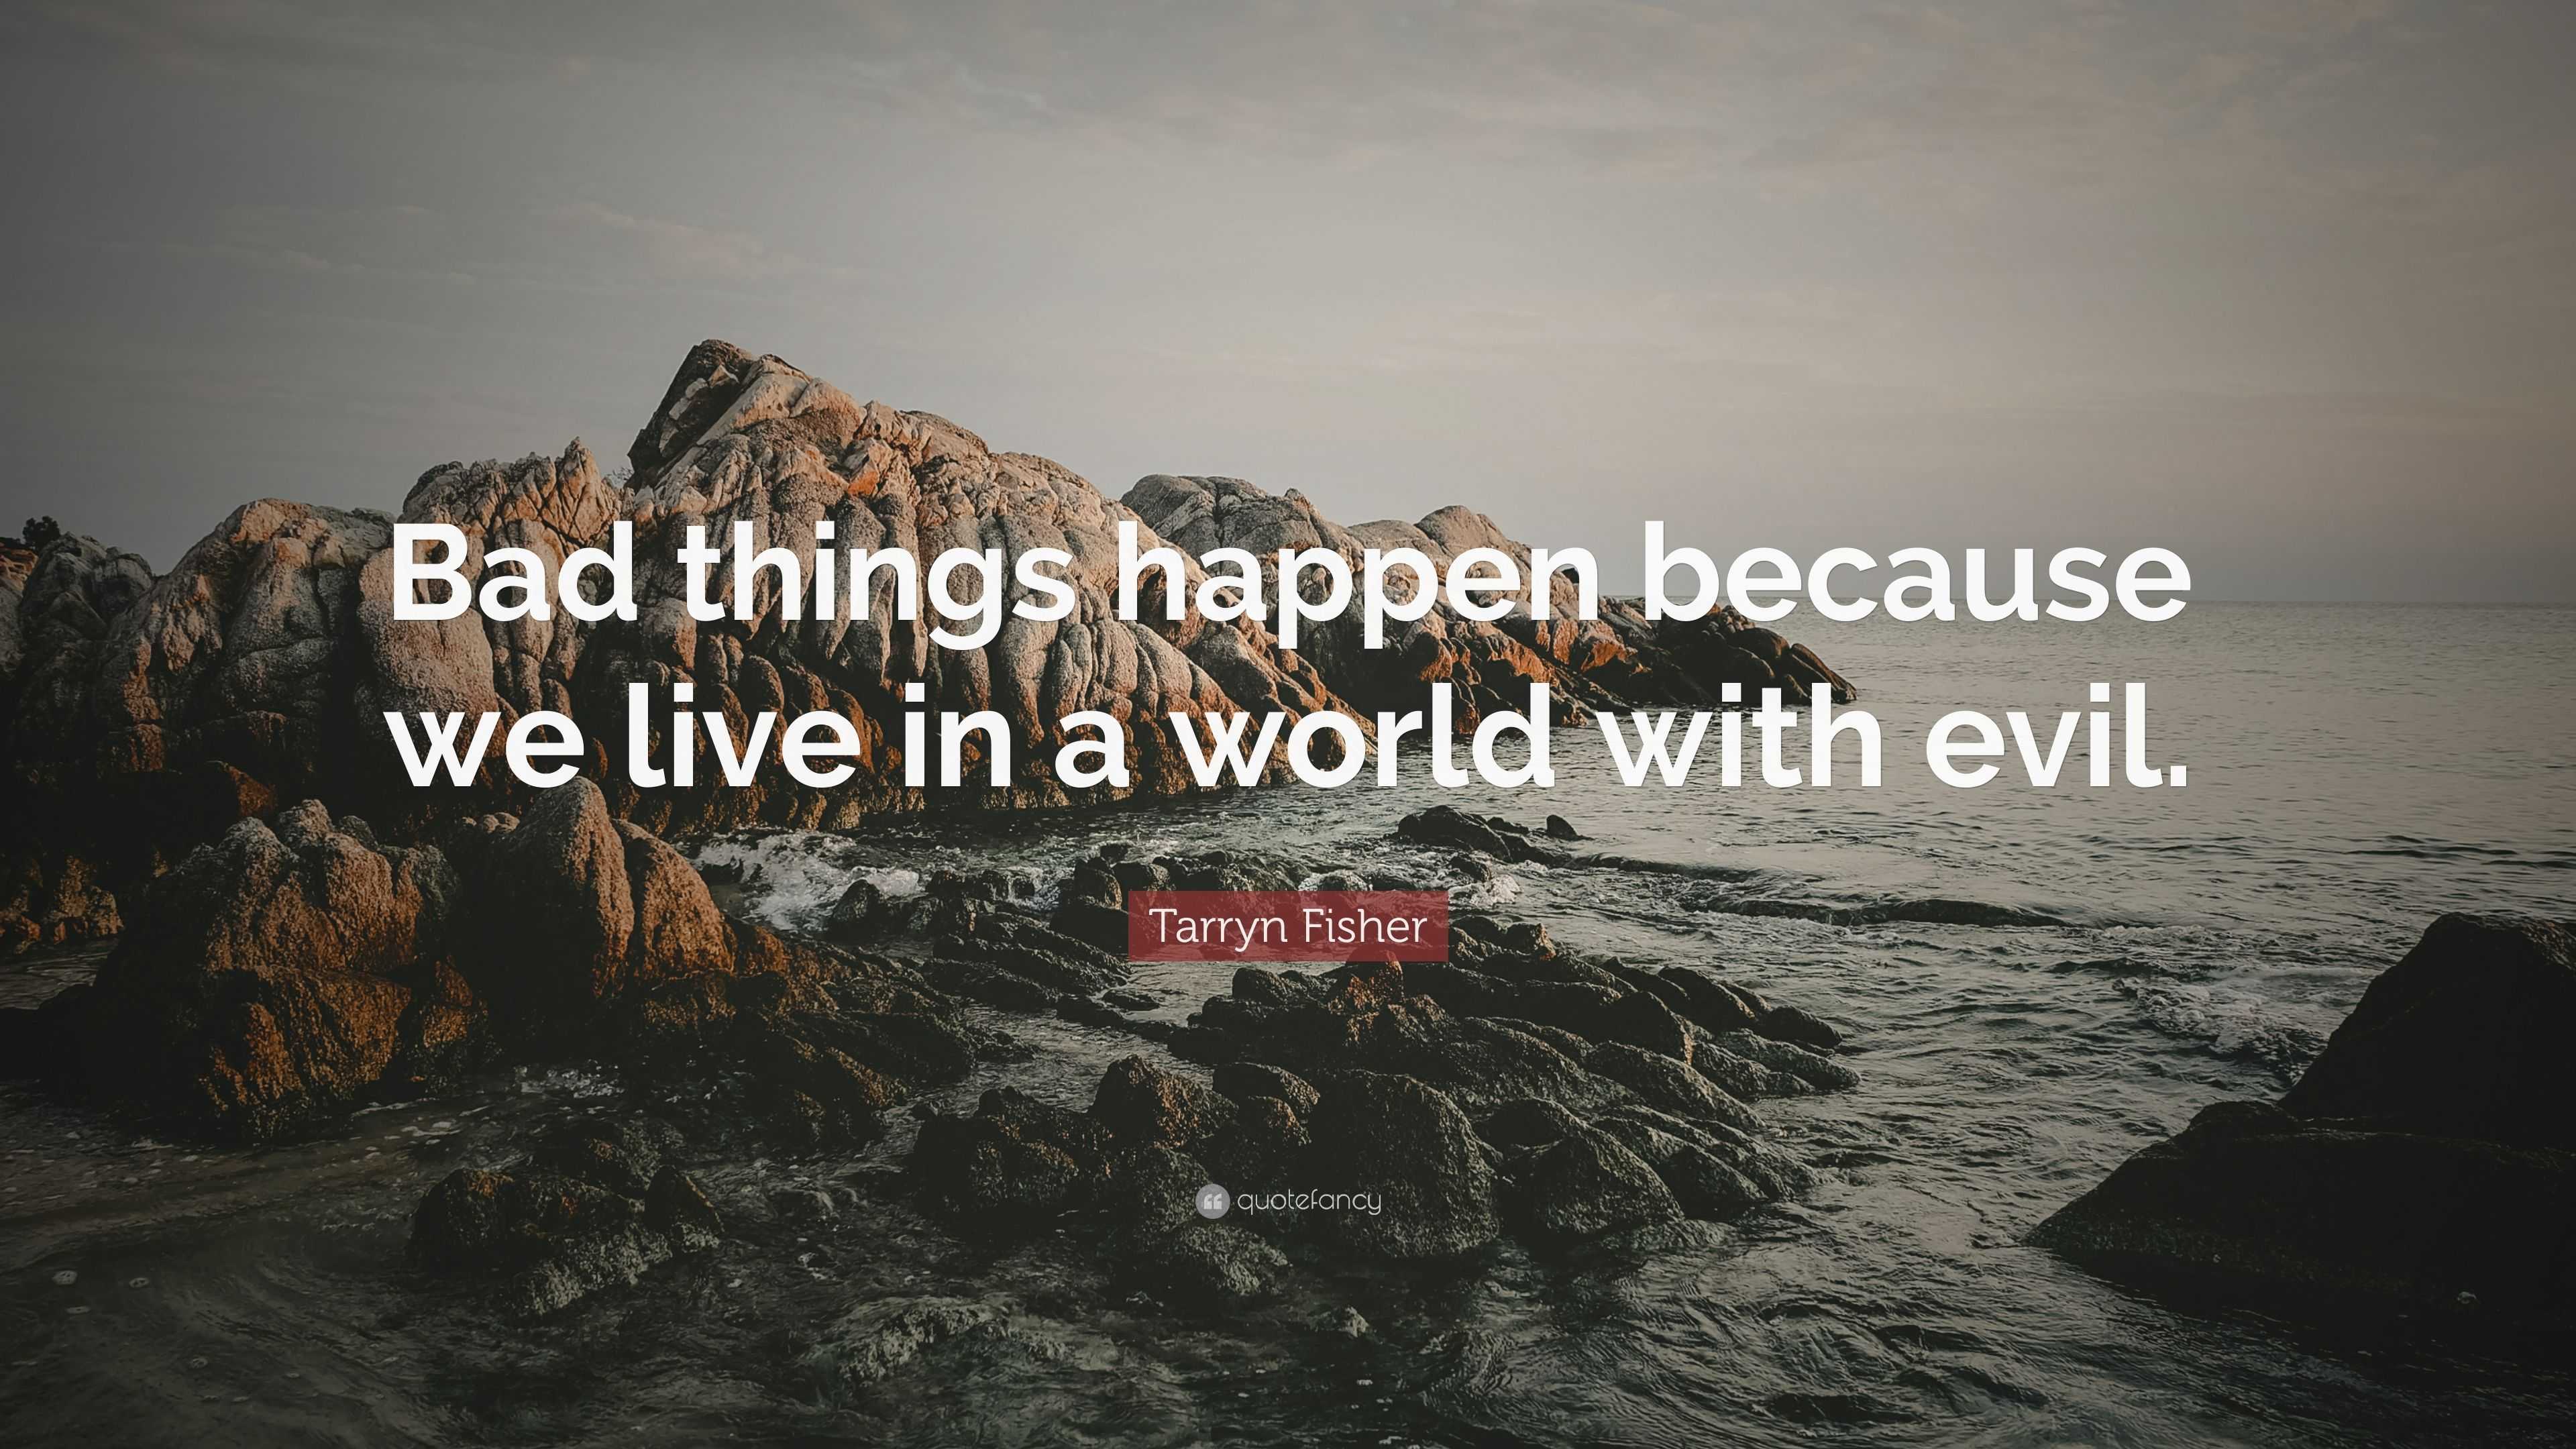 Tarryn Fisher Quote “Bad things happen because we live in a world with